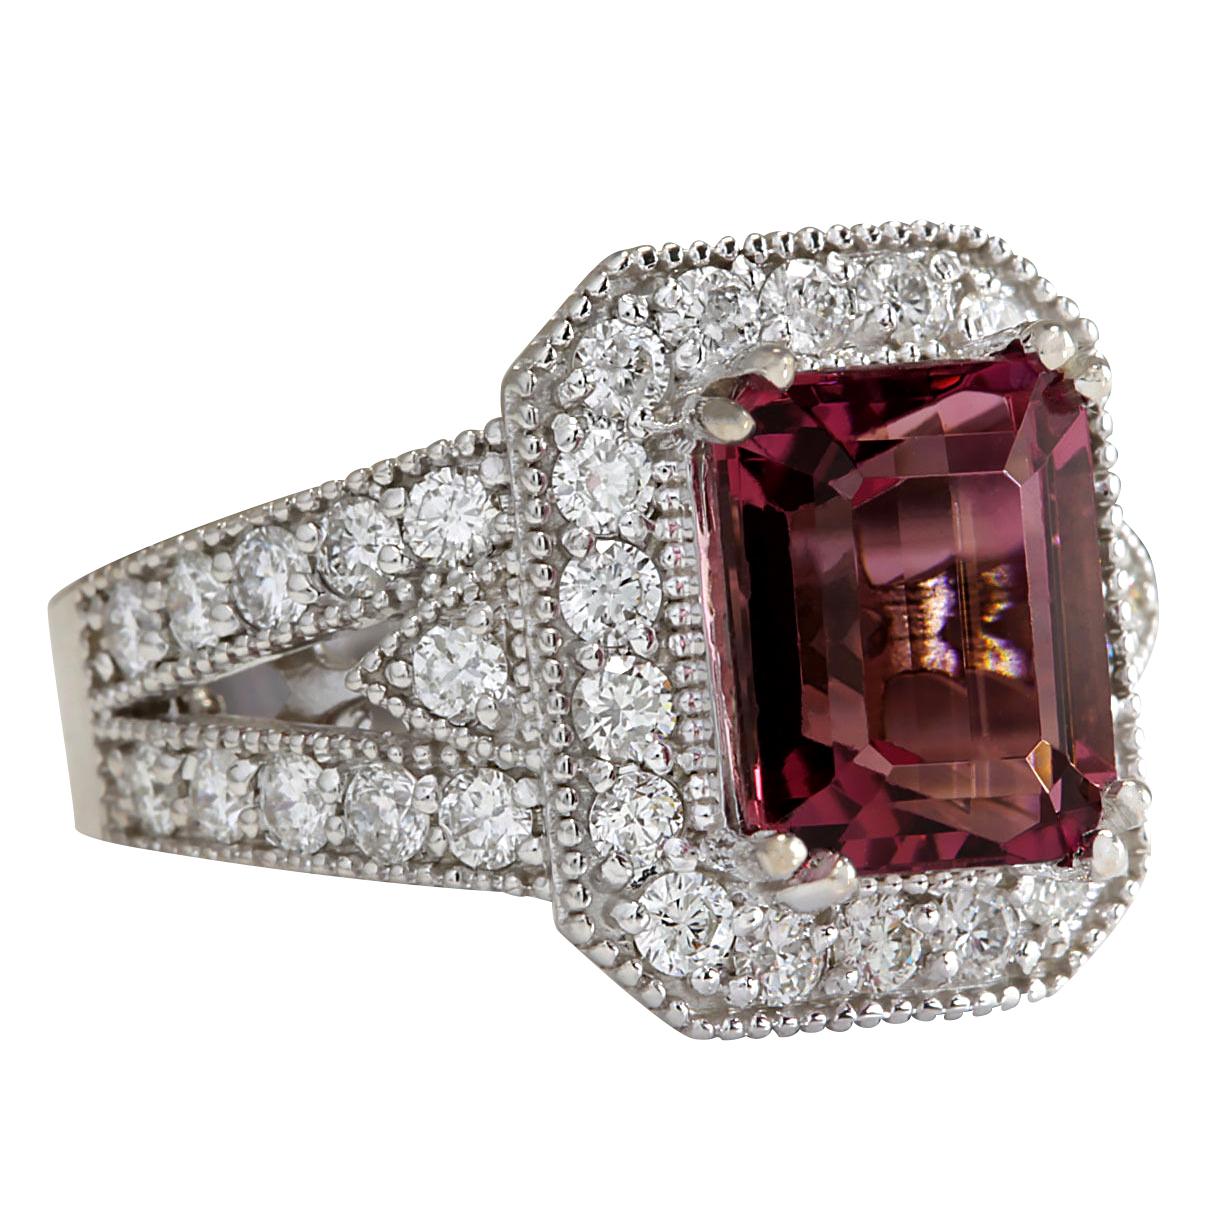 Stamped: 14K White Gold
Total Ring Weight: 10.2 Grams
Total Natural Tourmaline Weight is 4.33 Carat (Measures: 10.00x8.00 mm)
Color: Pink
Total Natural Diamond Weight is 1.45 Carat
Color: F-G, Clarity: VS2-SI1
Face Measures: 15.90x13.60 mm
Sku: